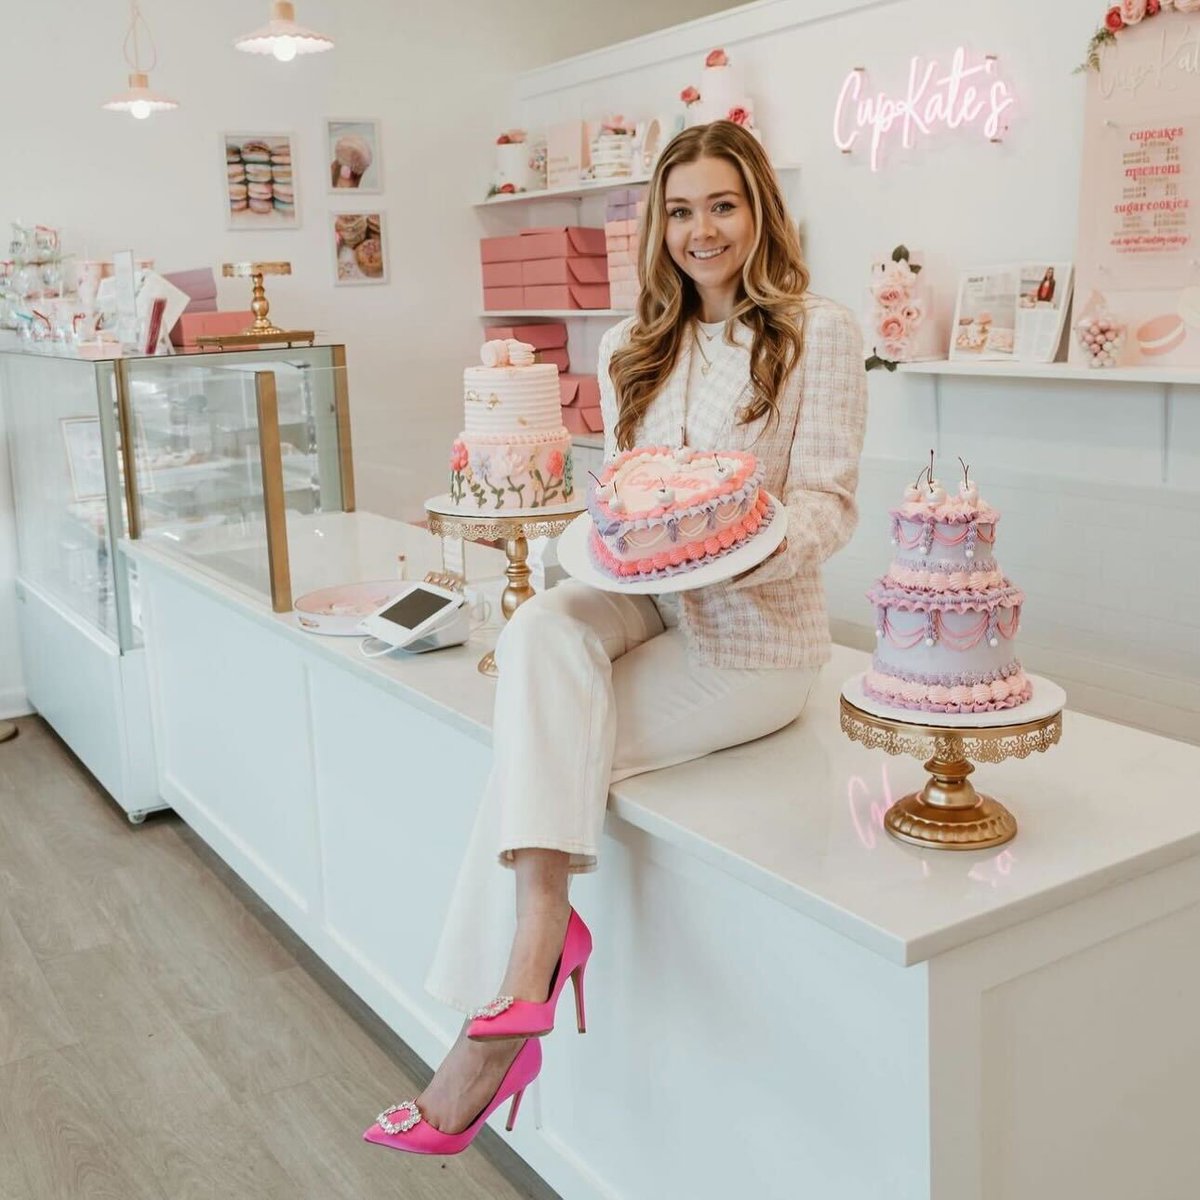 Growing up, Katelyn Singley, BBA ’18, was inspired by her mother and grandmother's creativity with baking and crafting. Now, she’s the owner and founder of a boutique bakery, CupKate’s, that showcases hand-crafted desserts and homemade apparel. Read more: sju.edu/30under30/kate…